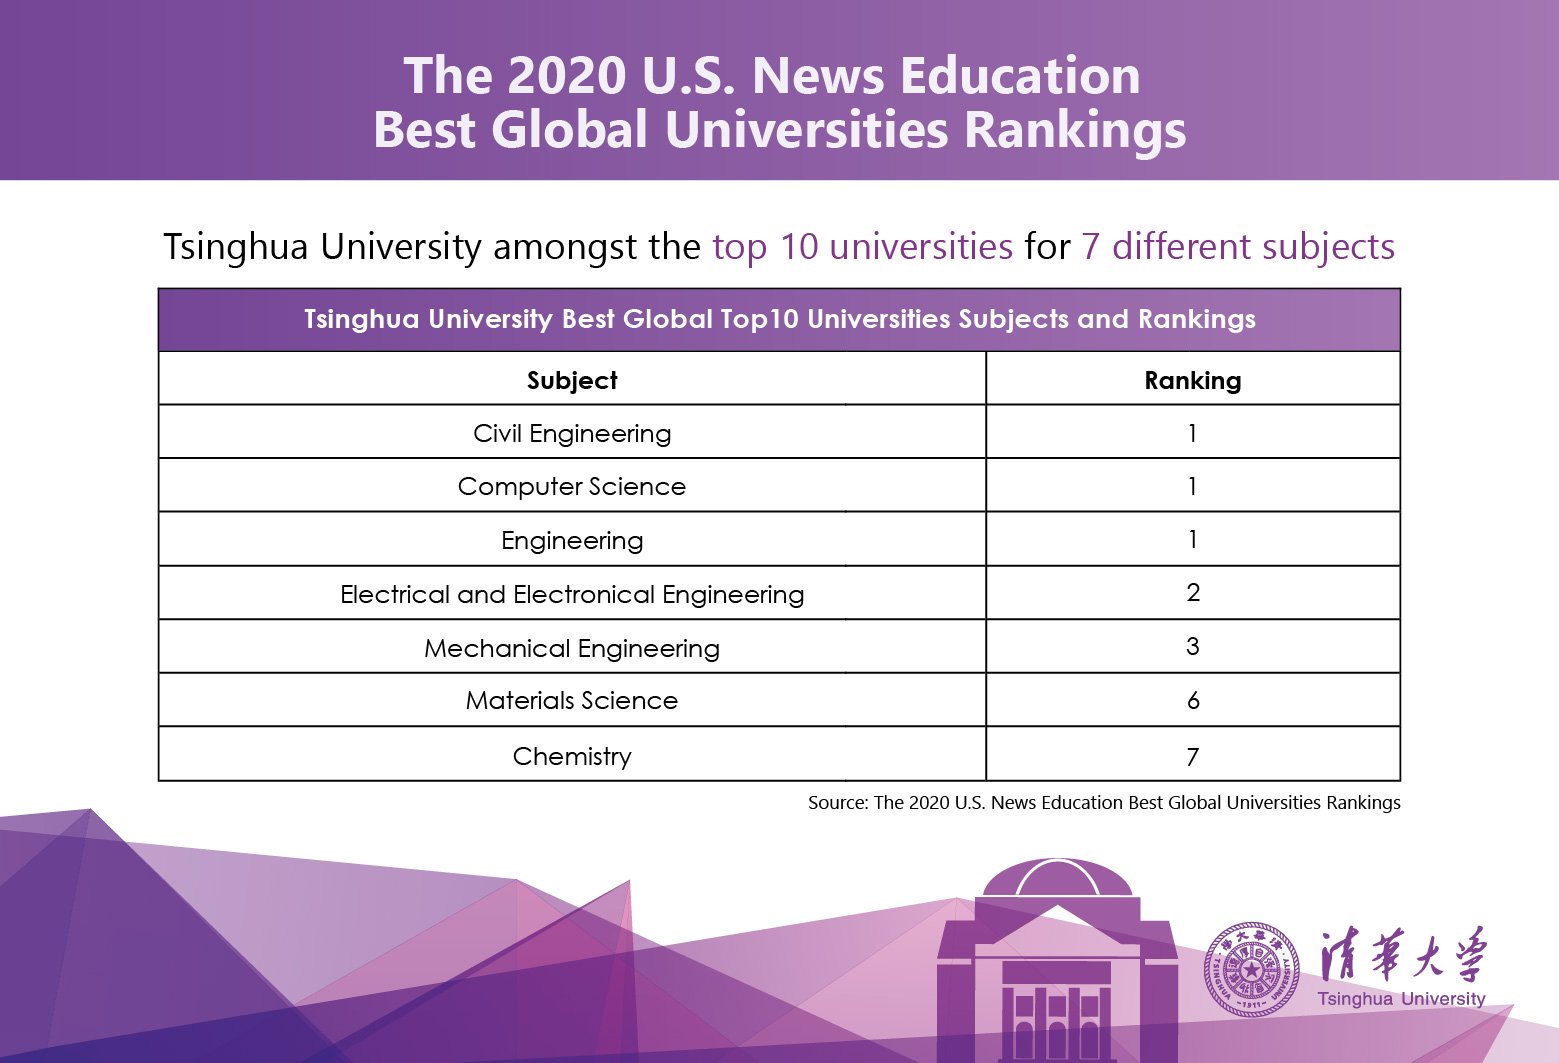 Razernij site Leugen Tsinghua University on Twitter: "#Tsinghua ranked as the top university for  Engineering, Computer Science and Civil Engineering according to  @USNewsEducation #BestGlobal Universities #Rankings 2020. We are also  amongst the top 10 universities